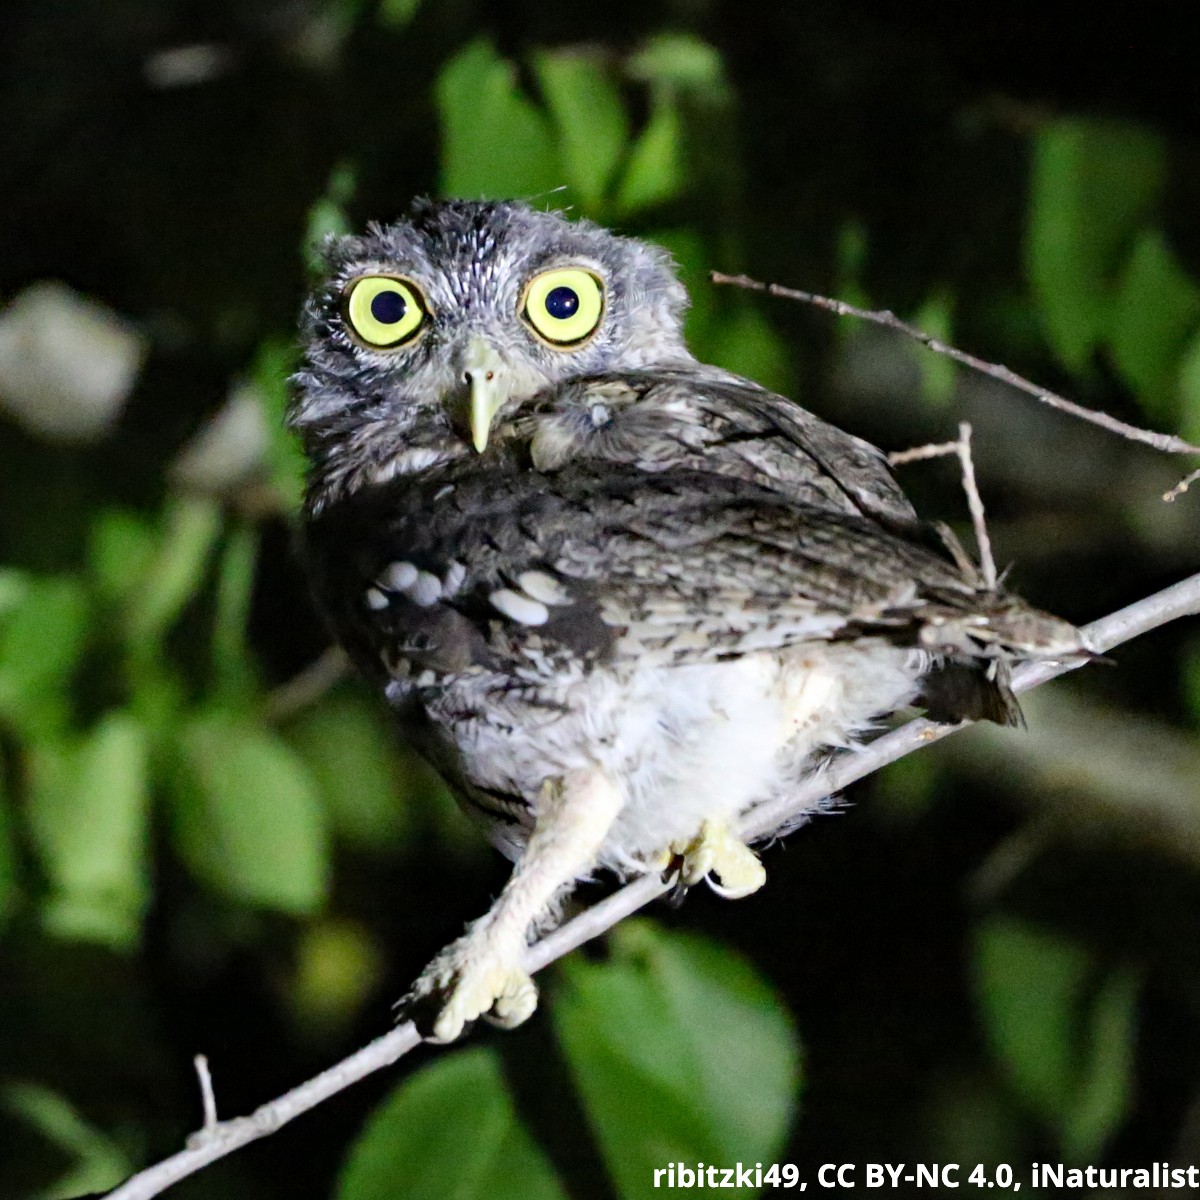 Hoo is this big-eyed bird? The Eastern Screech-Owl that’s hoo! This bird of prey is on the smaller end–about the size of a robin–and inhabits woodlands in the eastern USA. Despite its name, its calls sound more like soft trills than screeches.